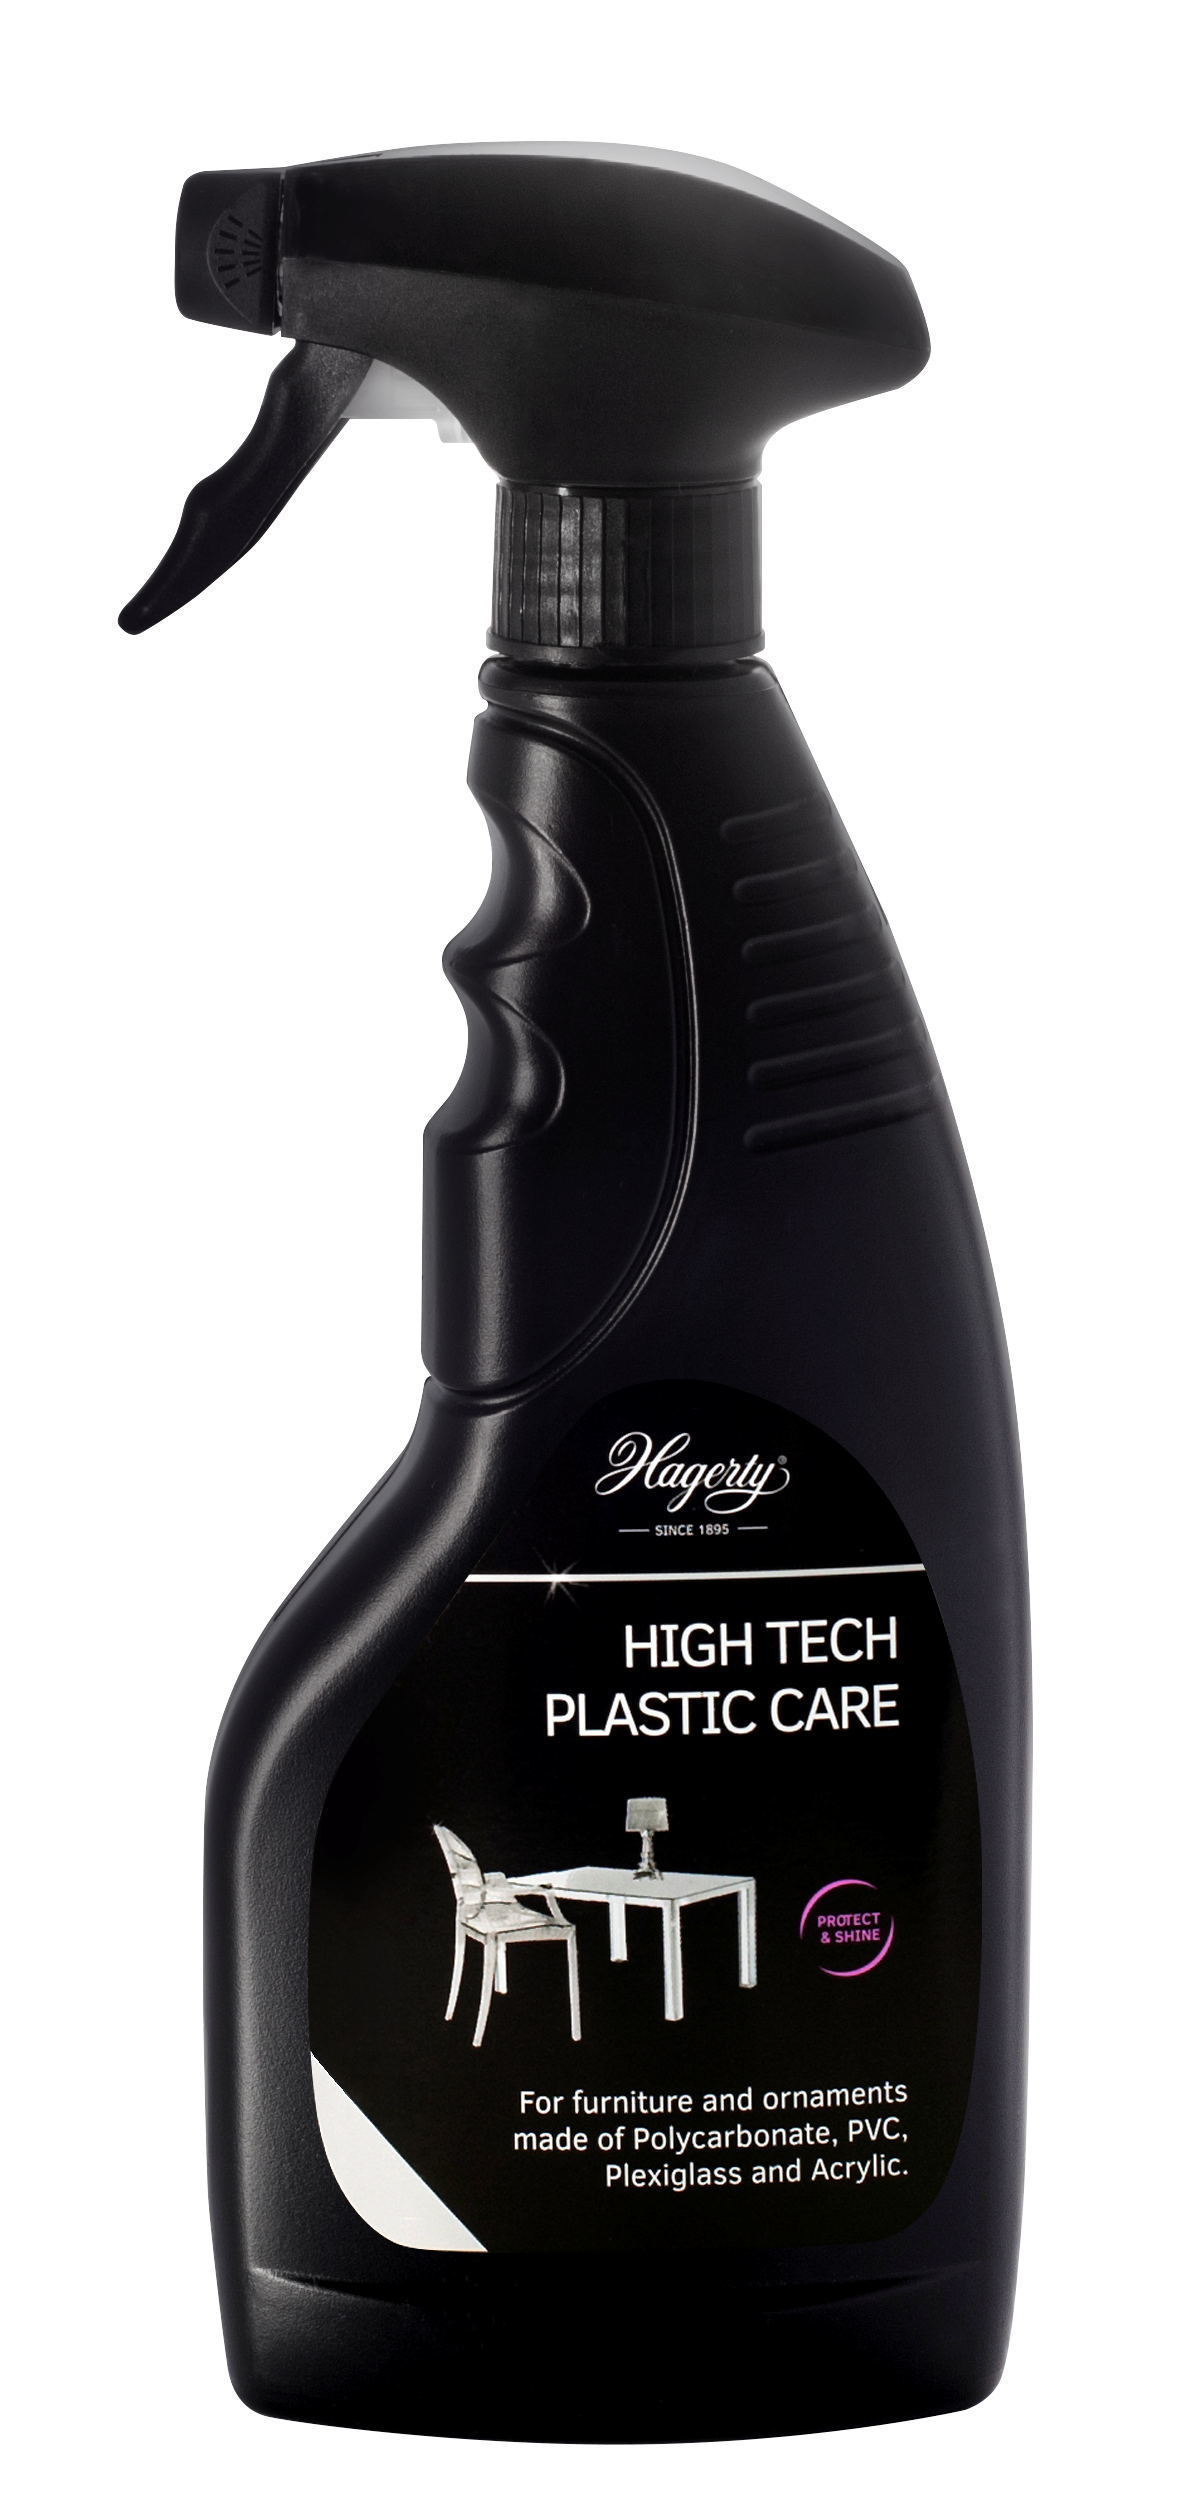 Hagerty High Tech Plastic Care - detergente spray per pvc, policarbona –  Detergenti Wagner